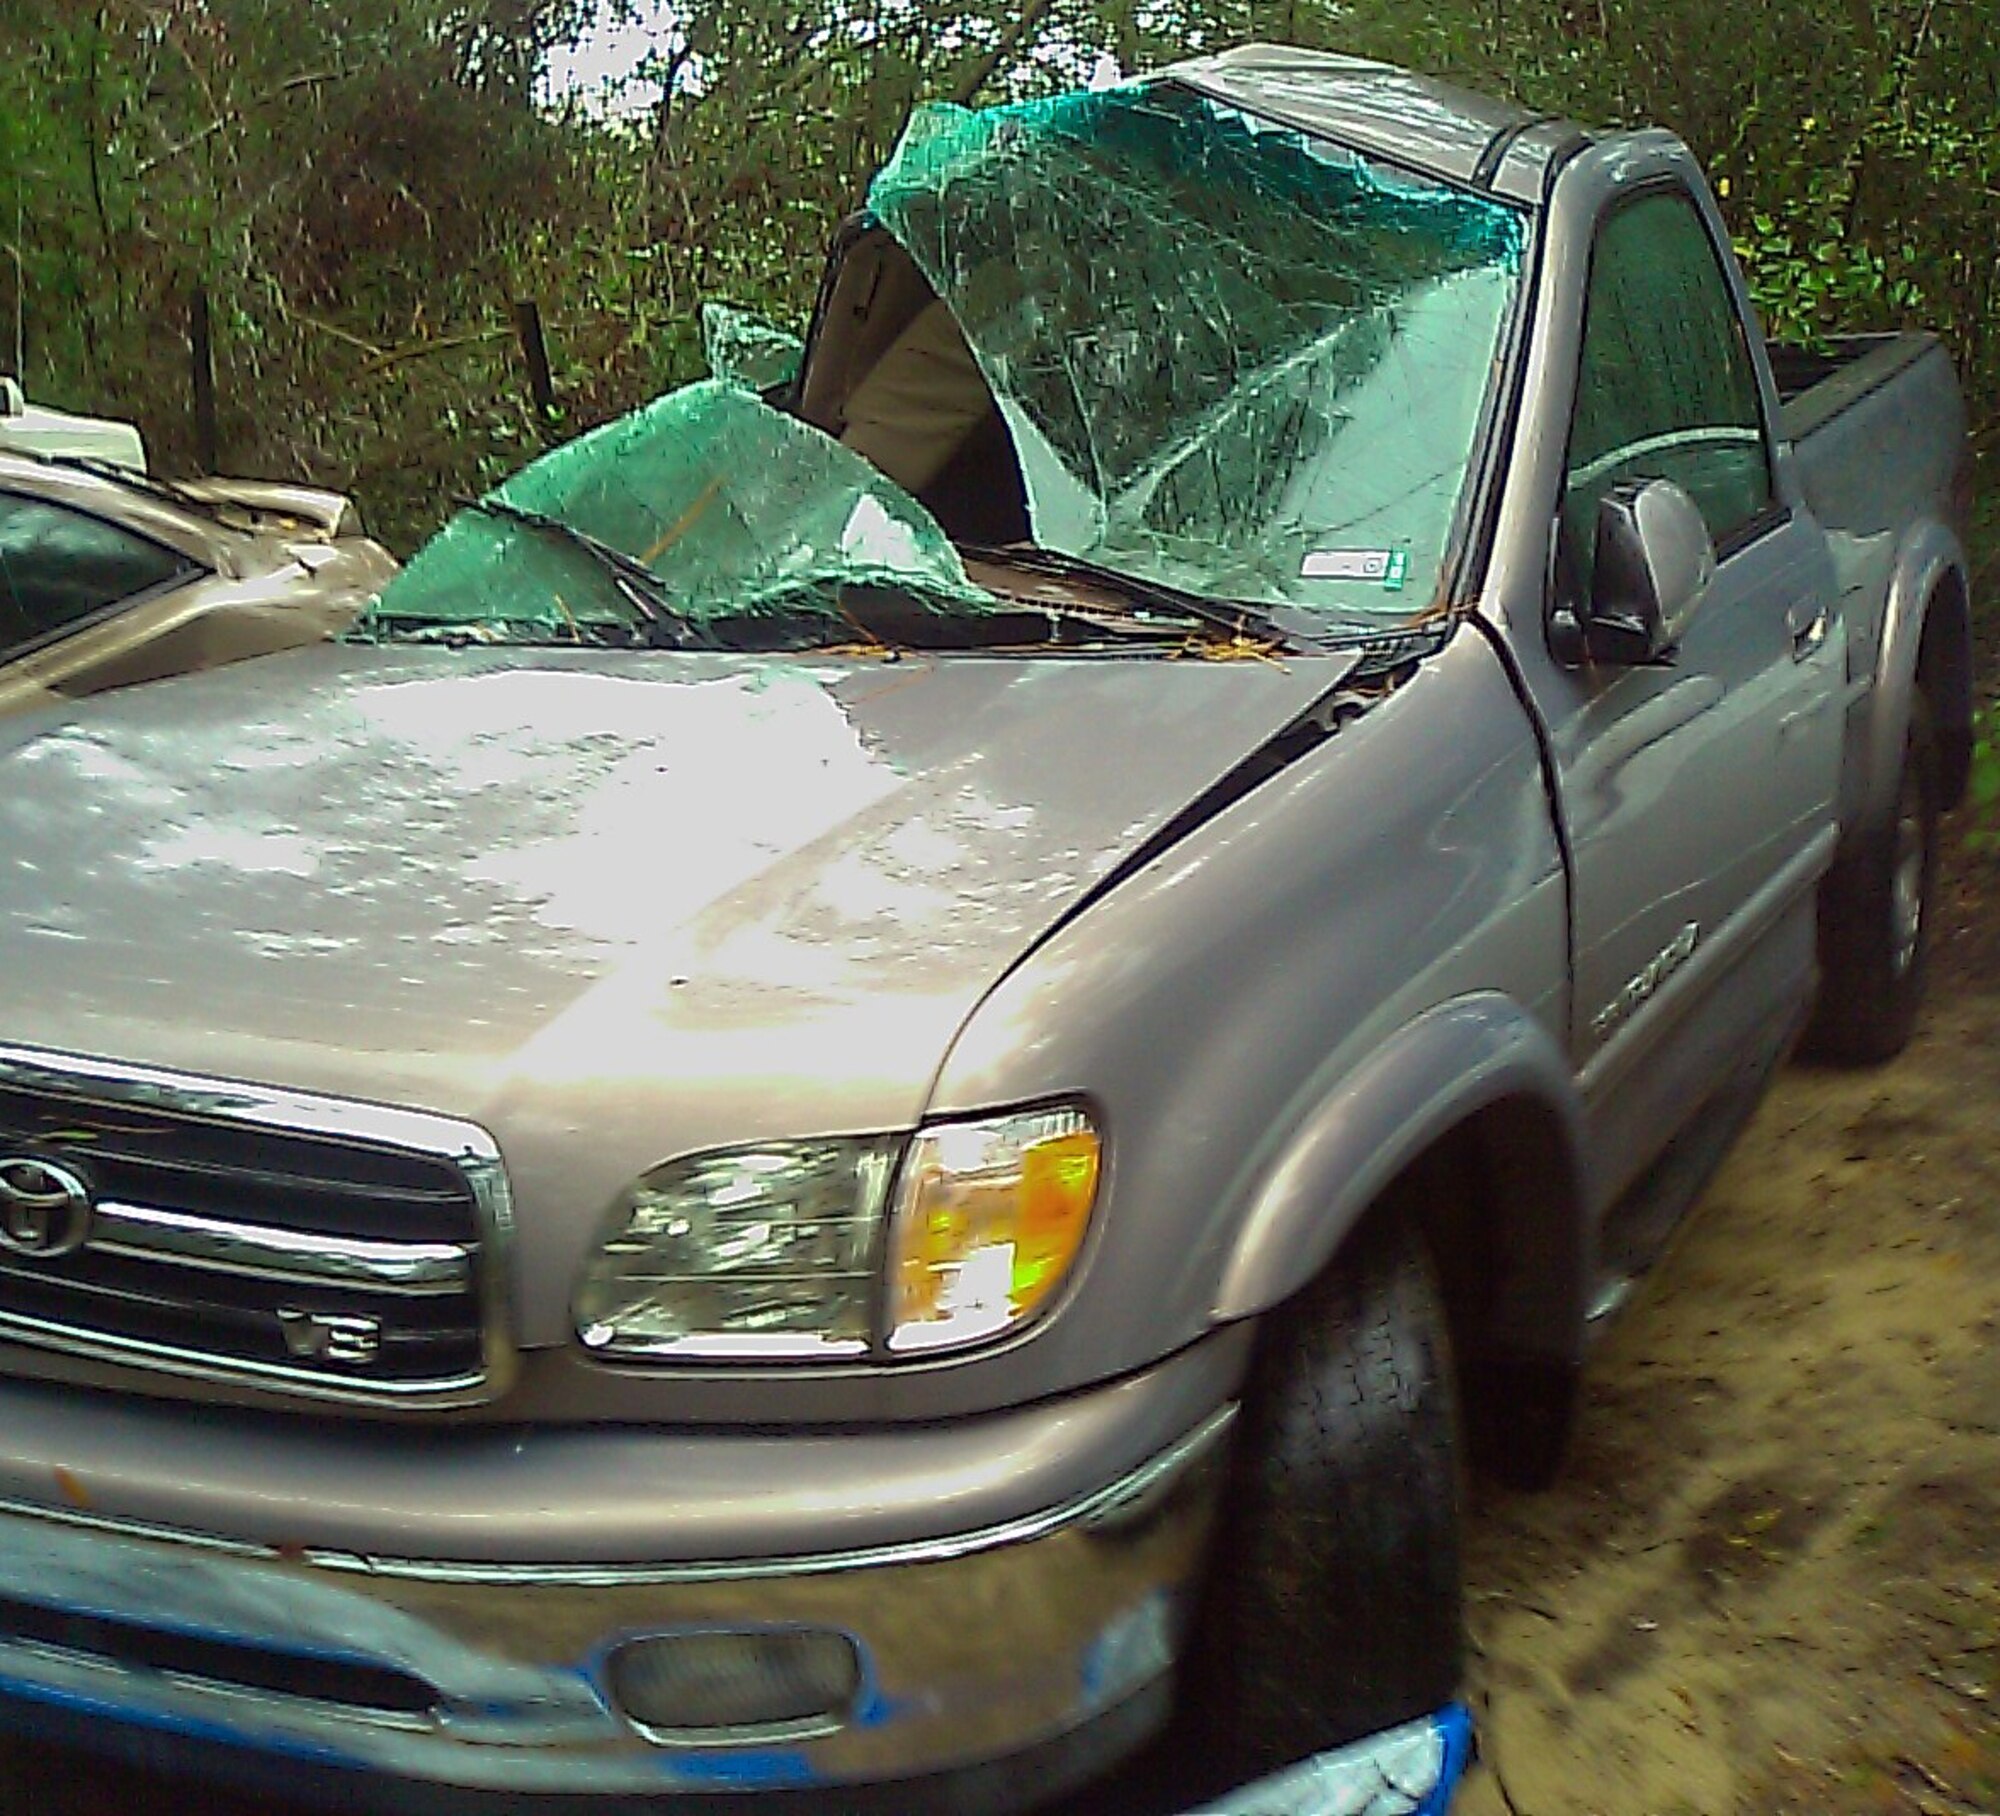 Capt. Tobias Switzer, 1st Special Operations Group, was driving this truck on Interstate 10 near DeFuniak Springs, Fla., when it hydroplaned and smashed into a tree Nov. 26, 2007. He survived the accident, but the truck was considered a total loss. (Courtesy photo)